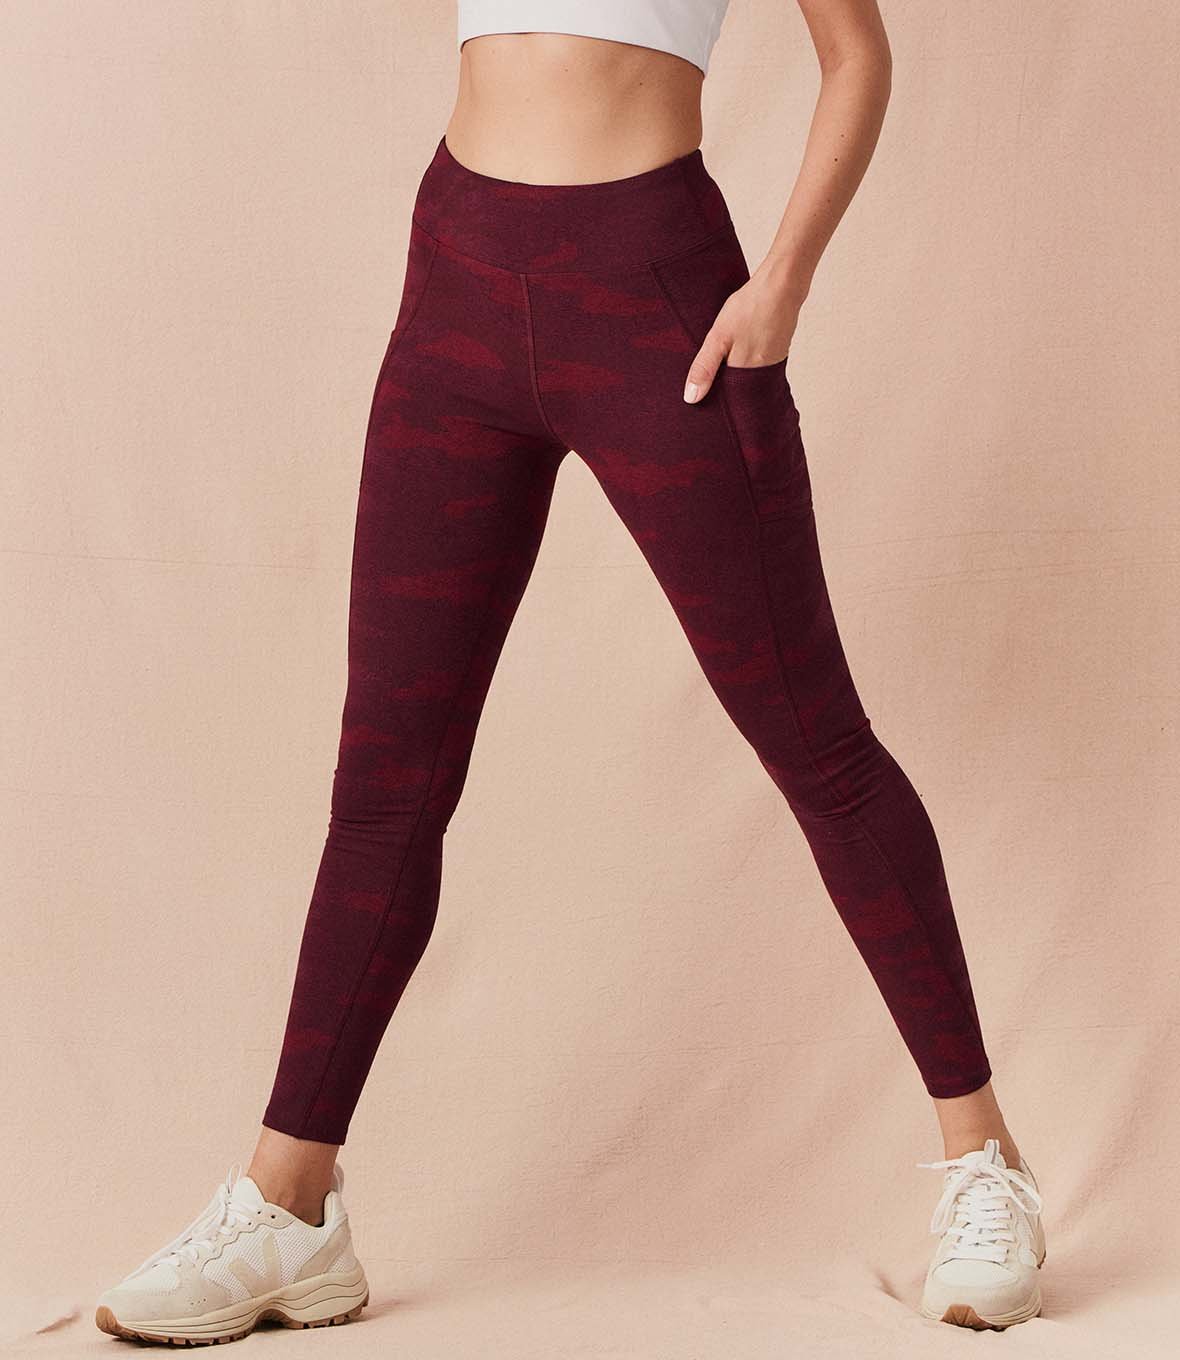 Women's Clearance Pureactive Pocket Legging made with Organic Cotton